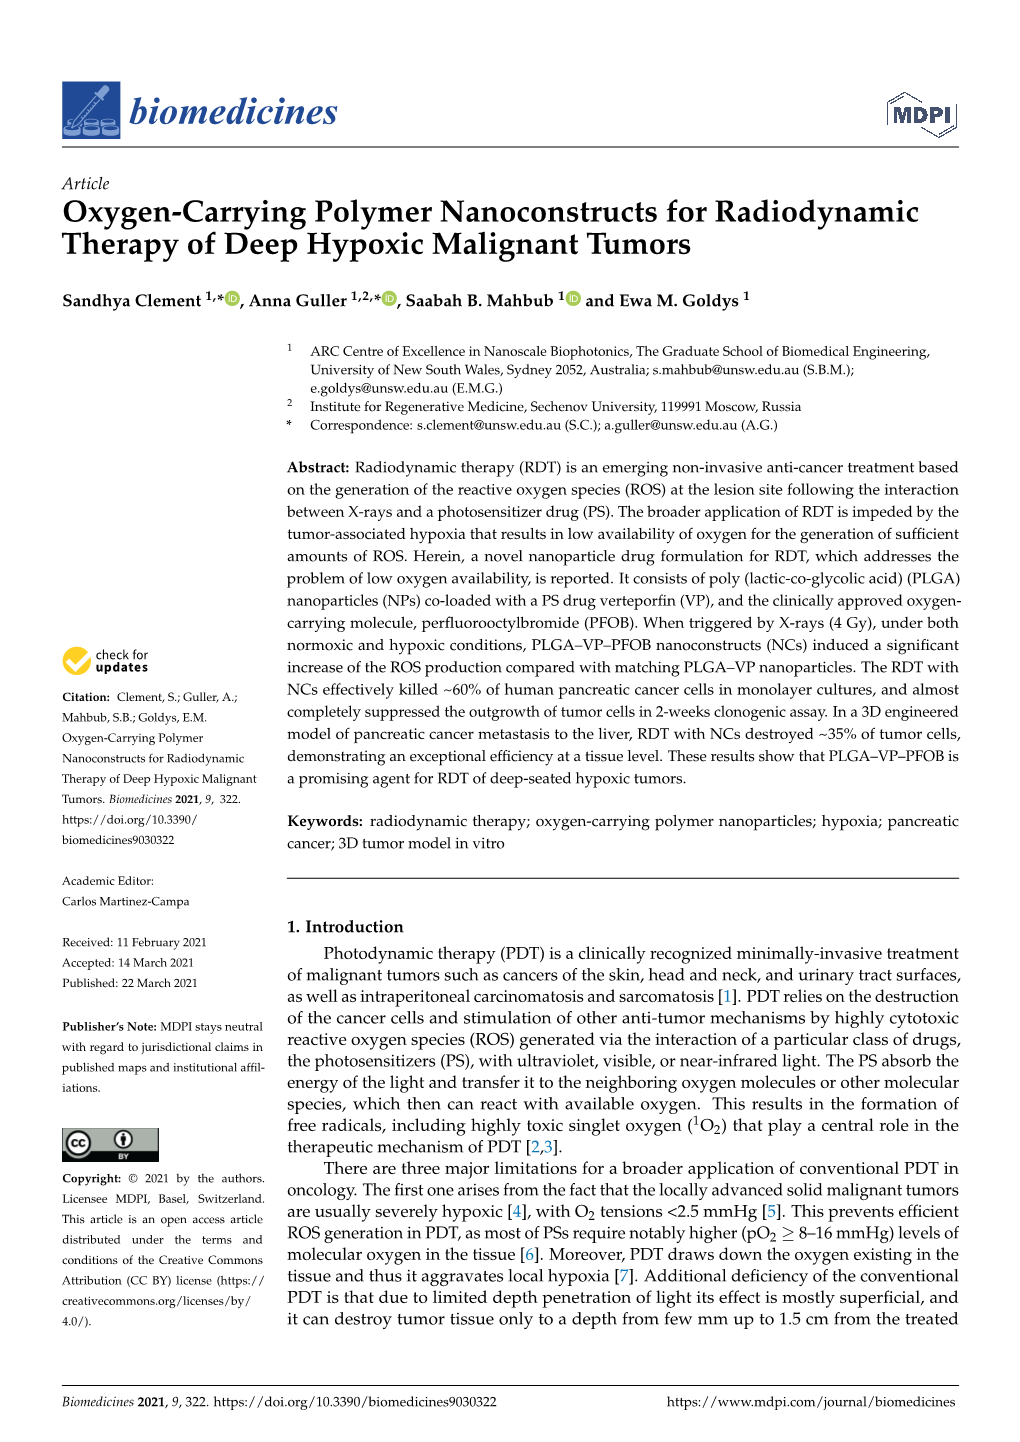 Oxygen-Carrying Polymer Nanoconstructs for Radiodynamic Therapy of Deep Hypoxic Malignant Tumors